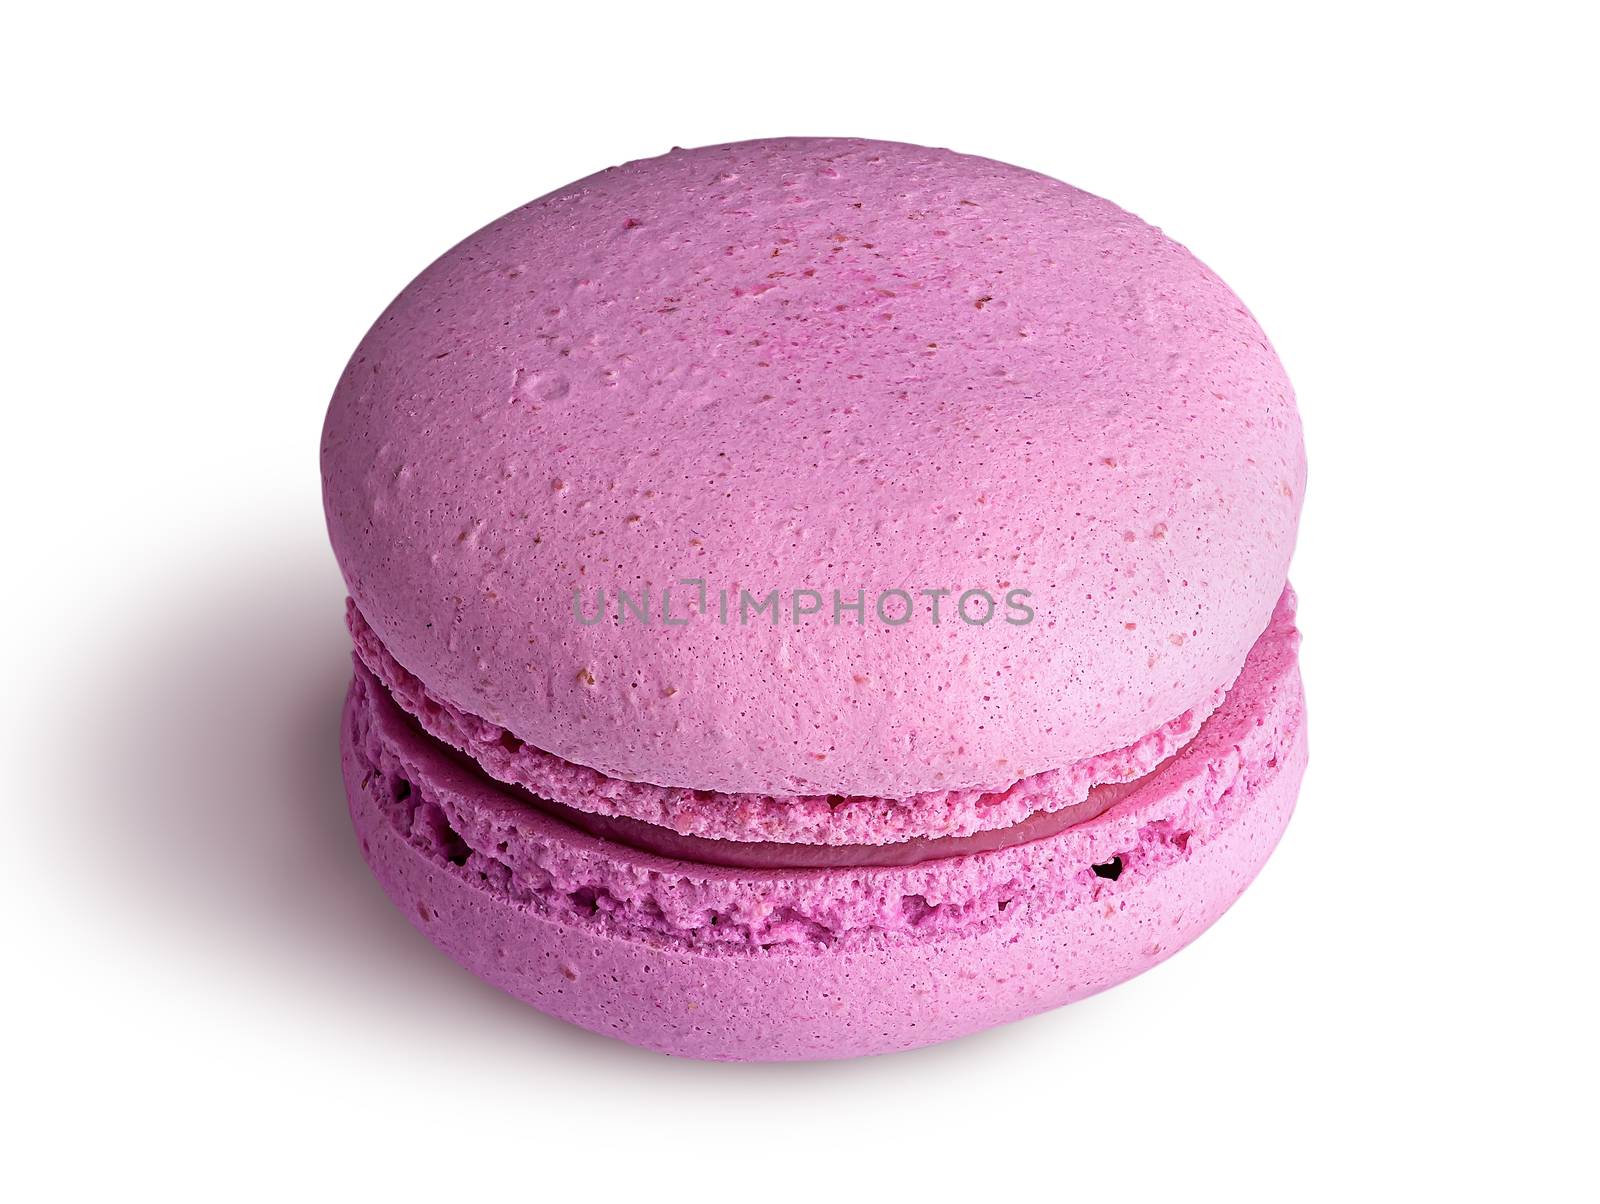 One pink macaroon angled view by Cipariss